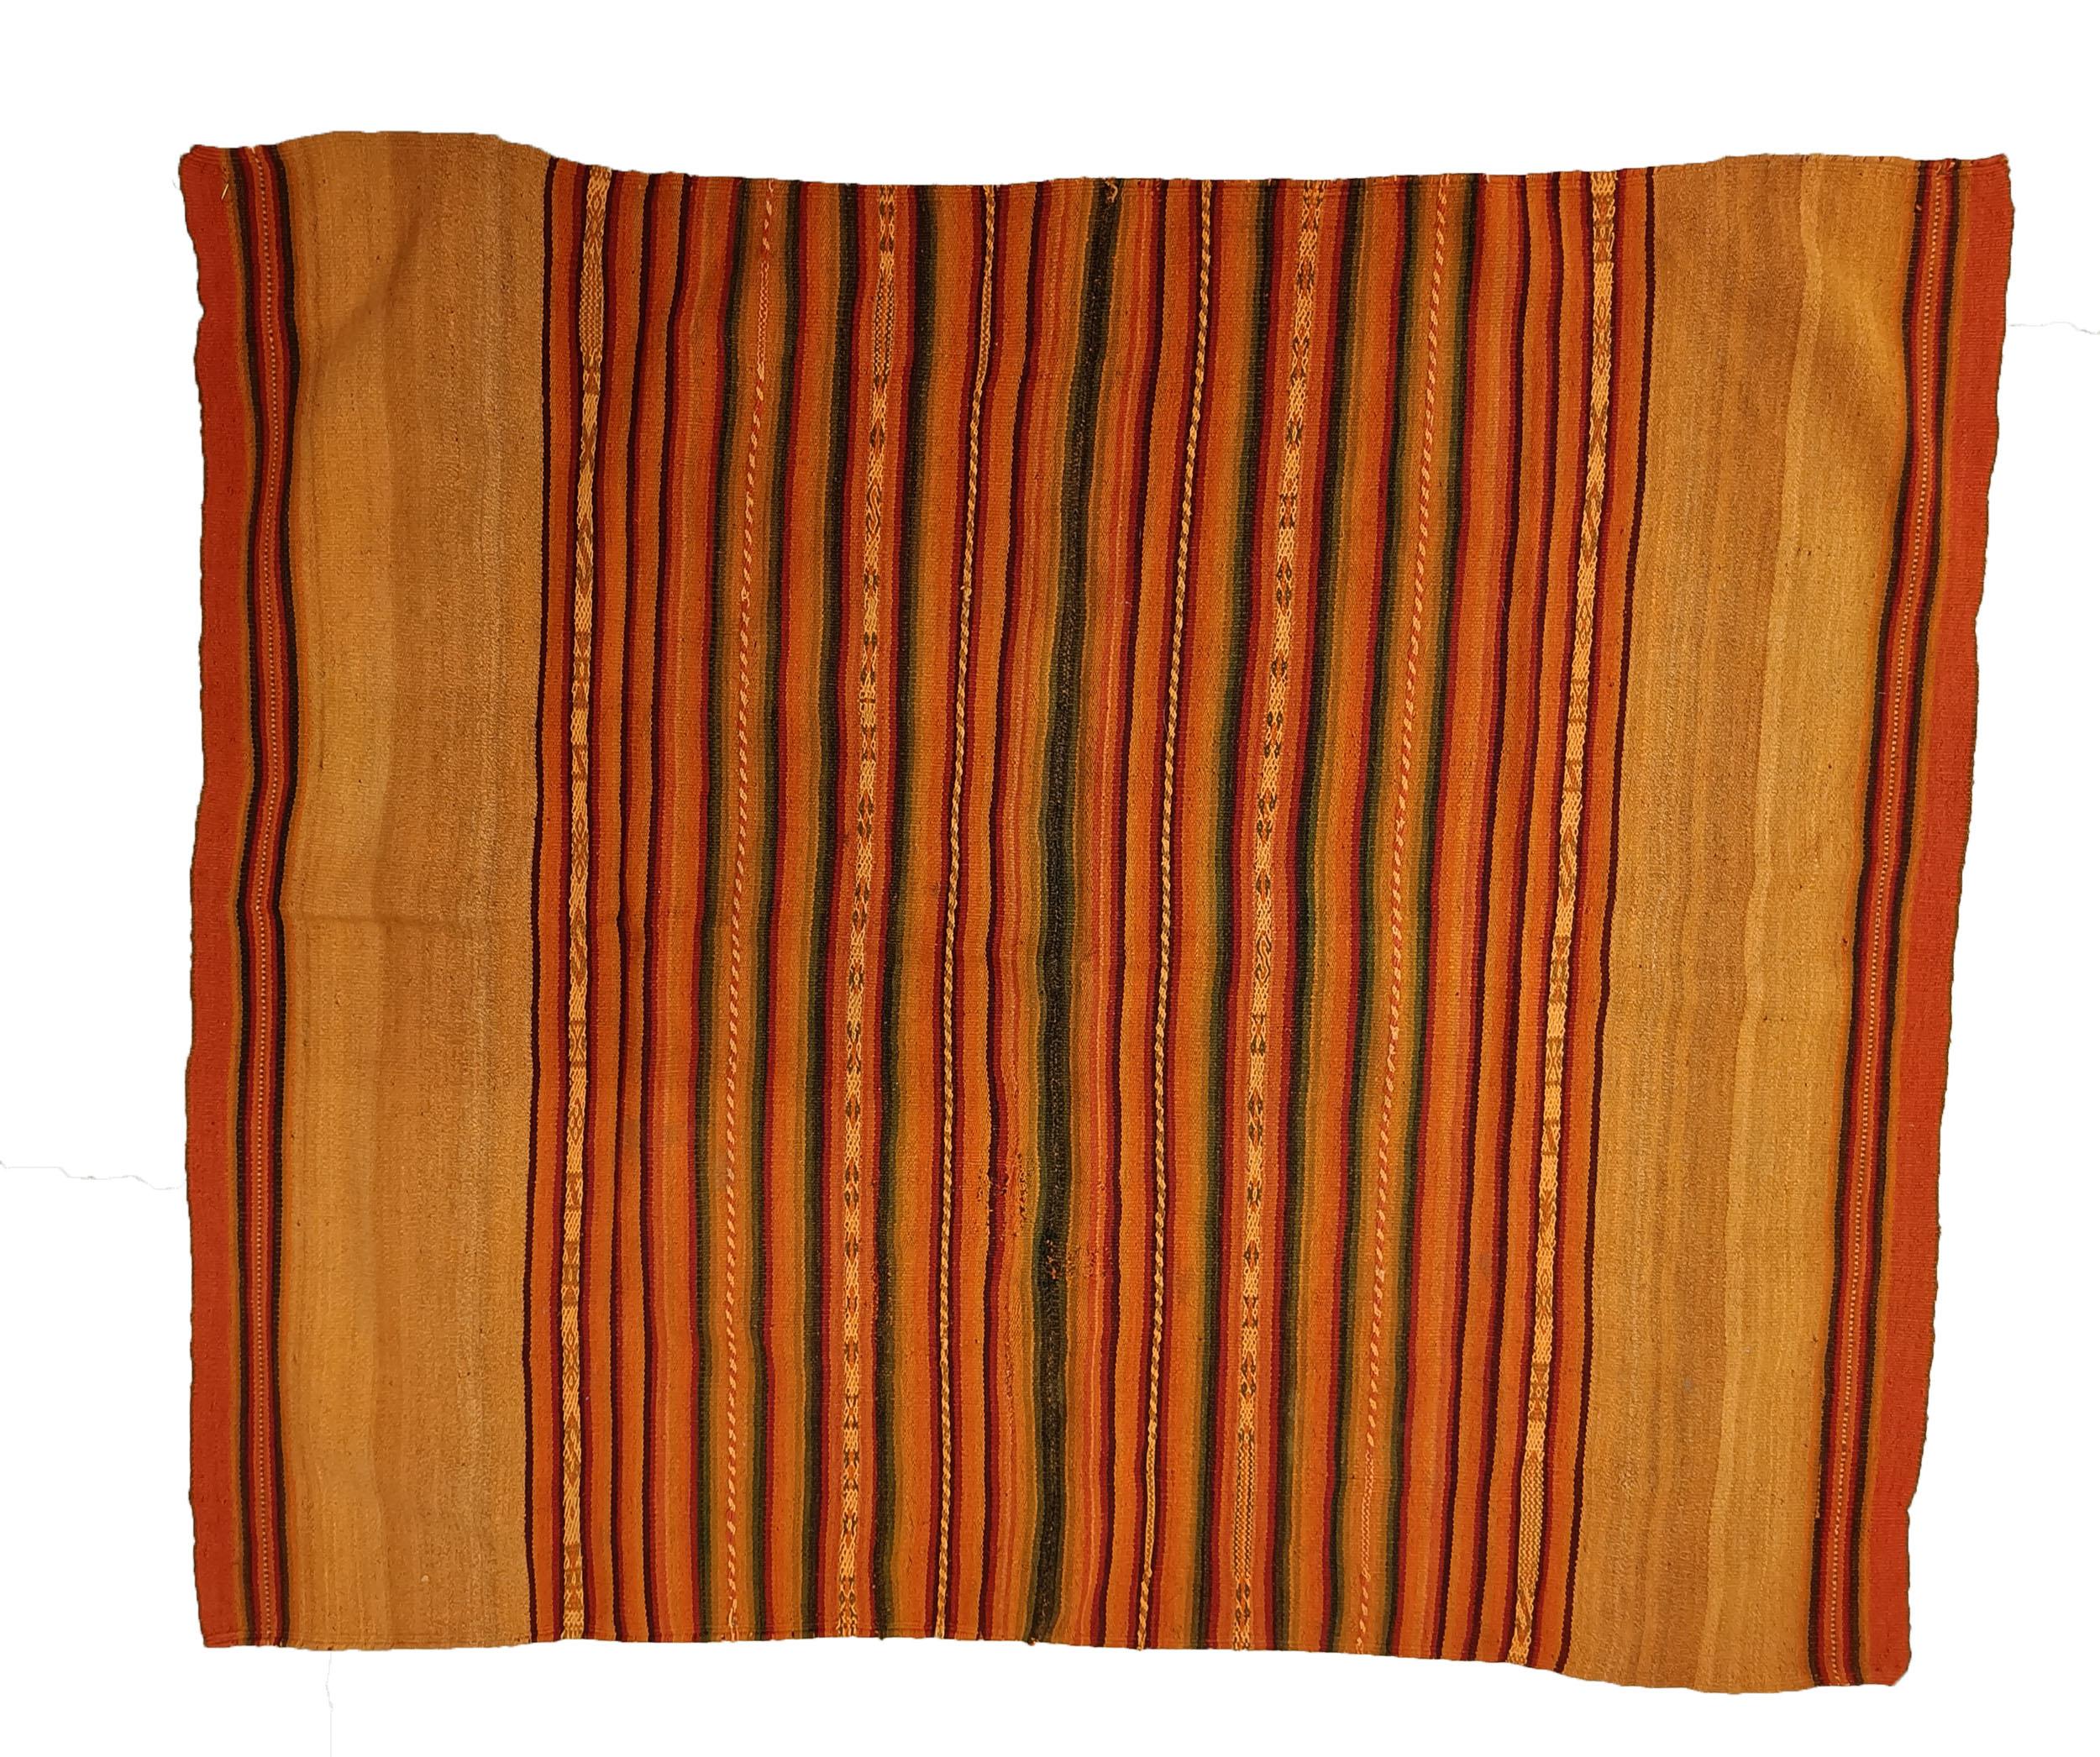 Vintage Andean Peruvian Manta Cloth South American Vintage Textiles.
A very fine Vintage Manta in ochre colours from the High Andes region of Peru Woven in came-lid fibre (Llama wool )beautifully executed in natural dyed colours 
Fine condition,